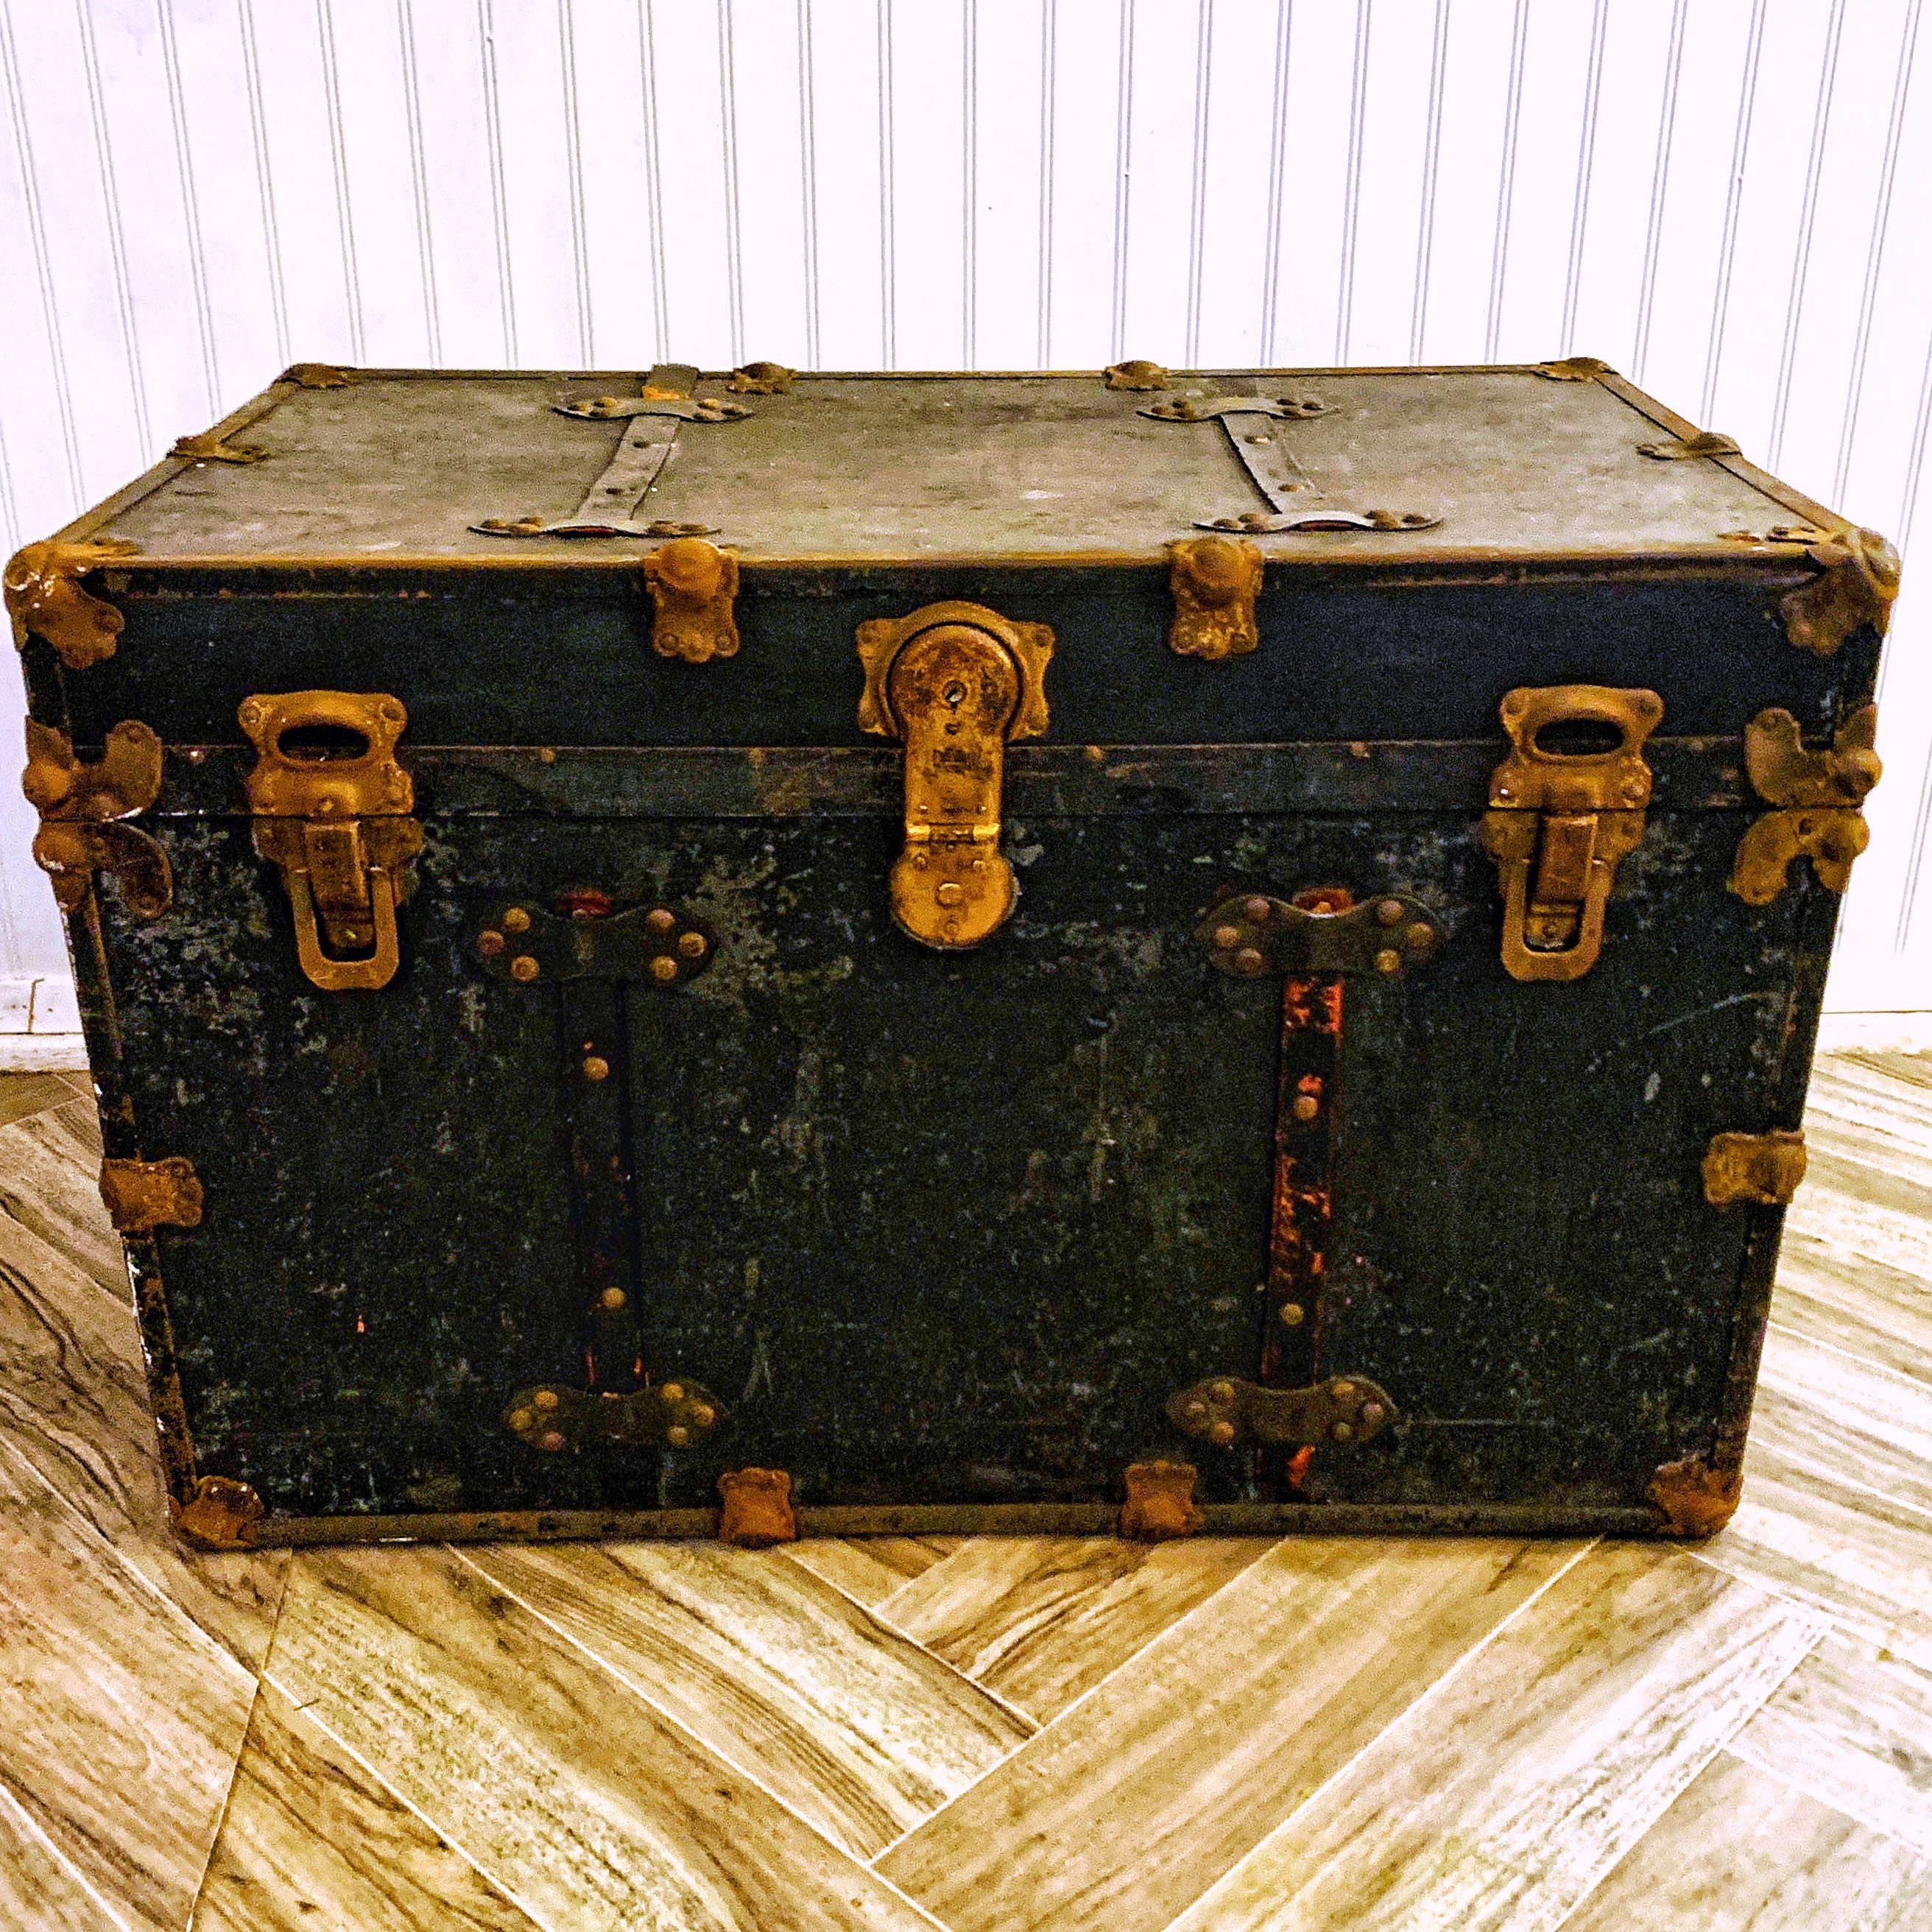 19th Century Wardrobe Steamer Trunk For Sale at 1stDibs  steamer trunk  wardrobe, vintage wardrobe trunk, 19th century steamer trunk